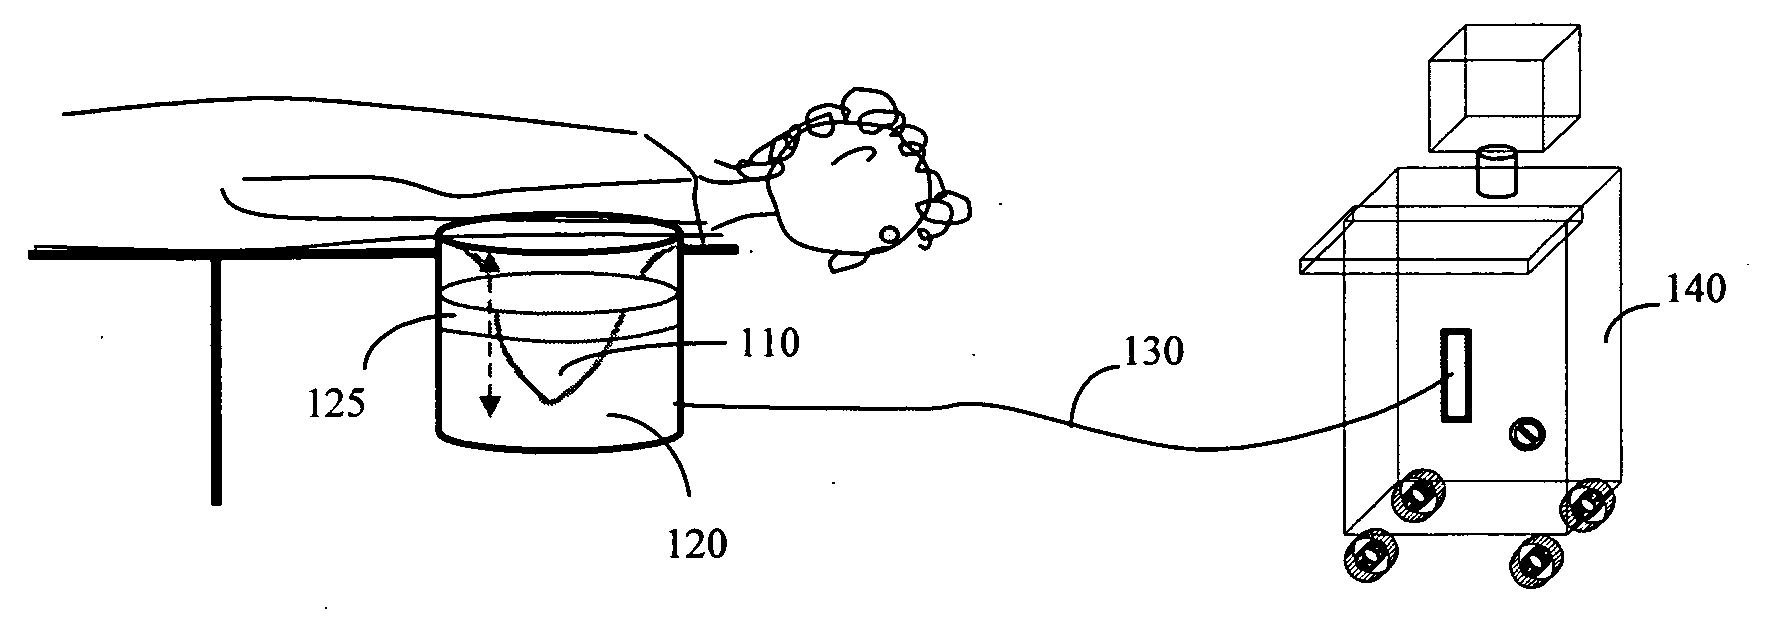 Apparatus and method for real time 3D body object scanning without touching or applying pressure to the body object